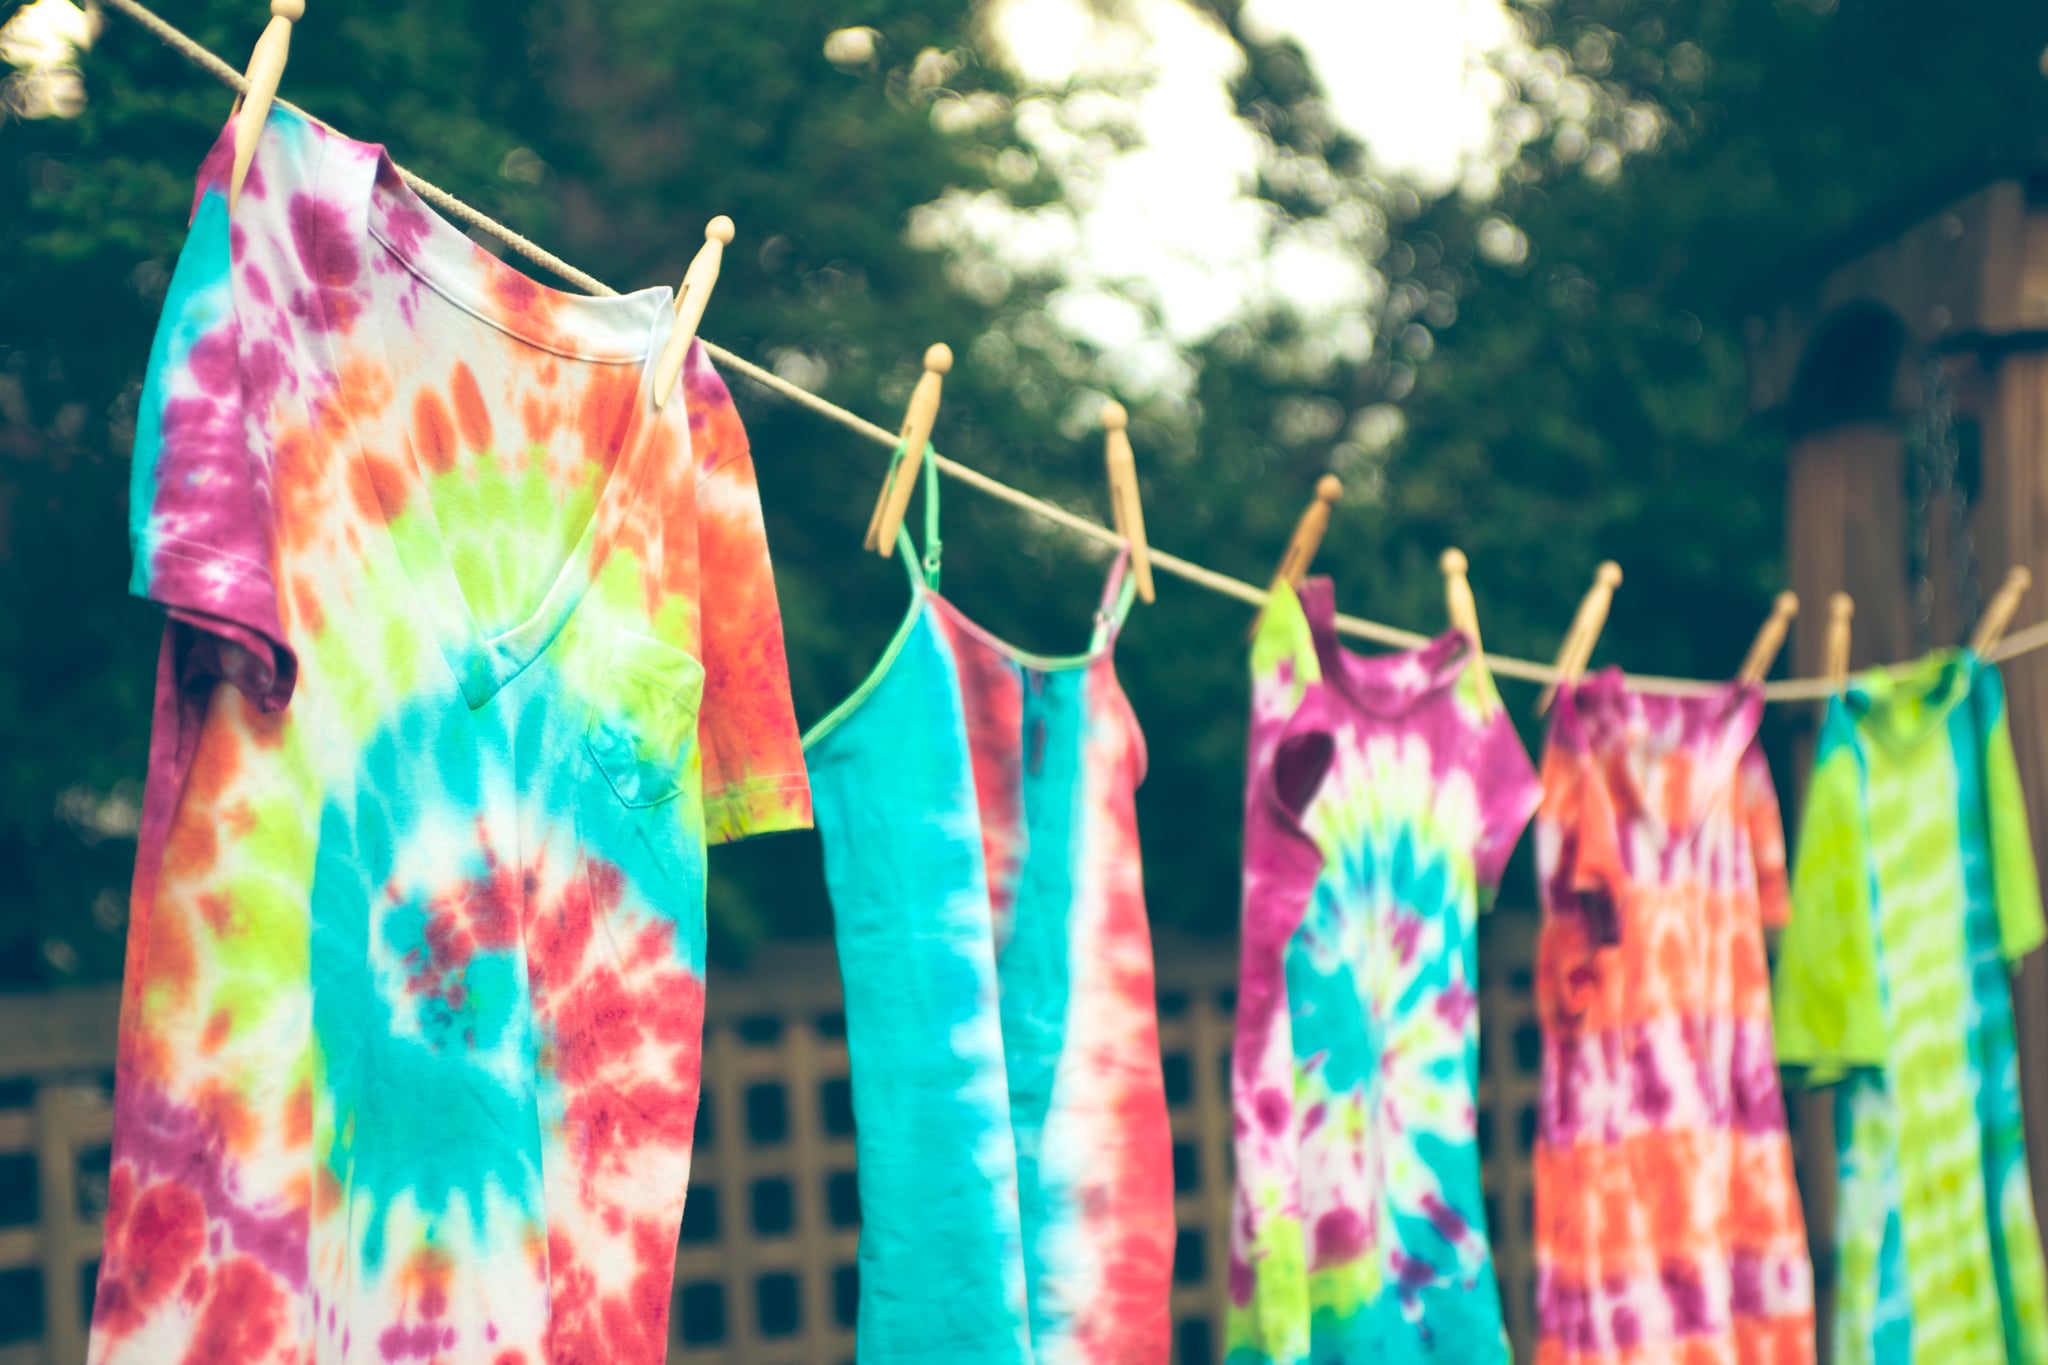 Groovy tie dyed tee shirts hanging from a clothes line